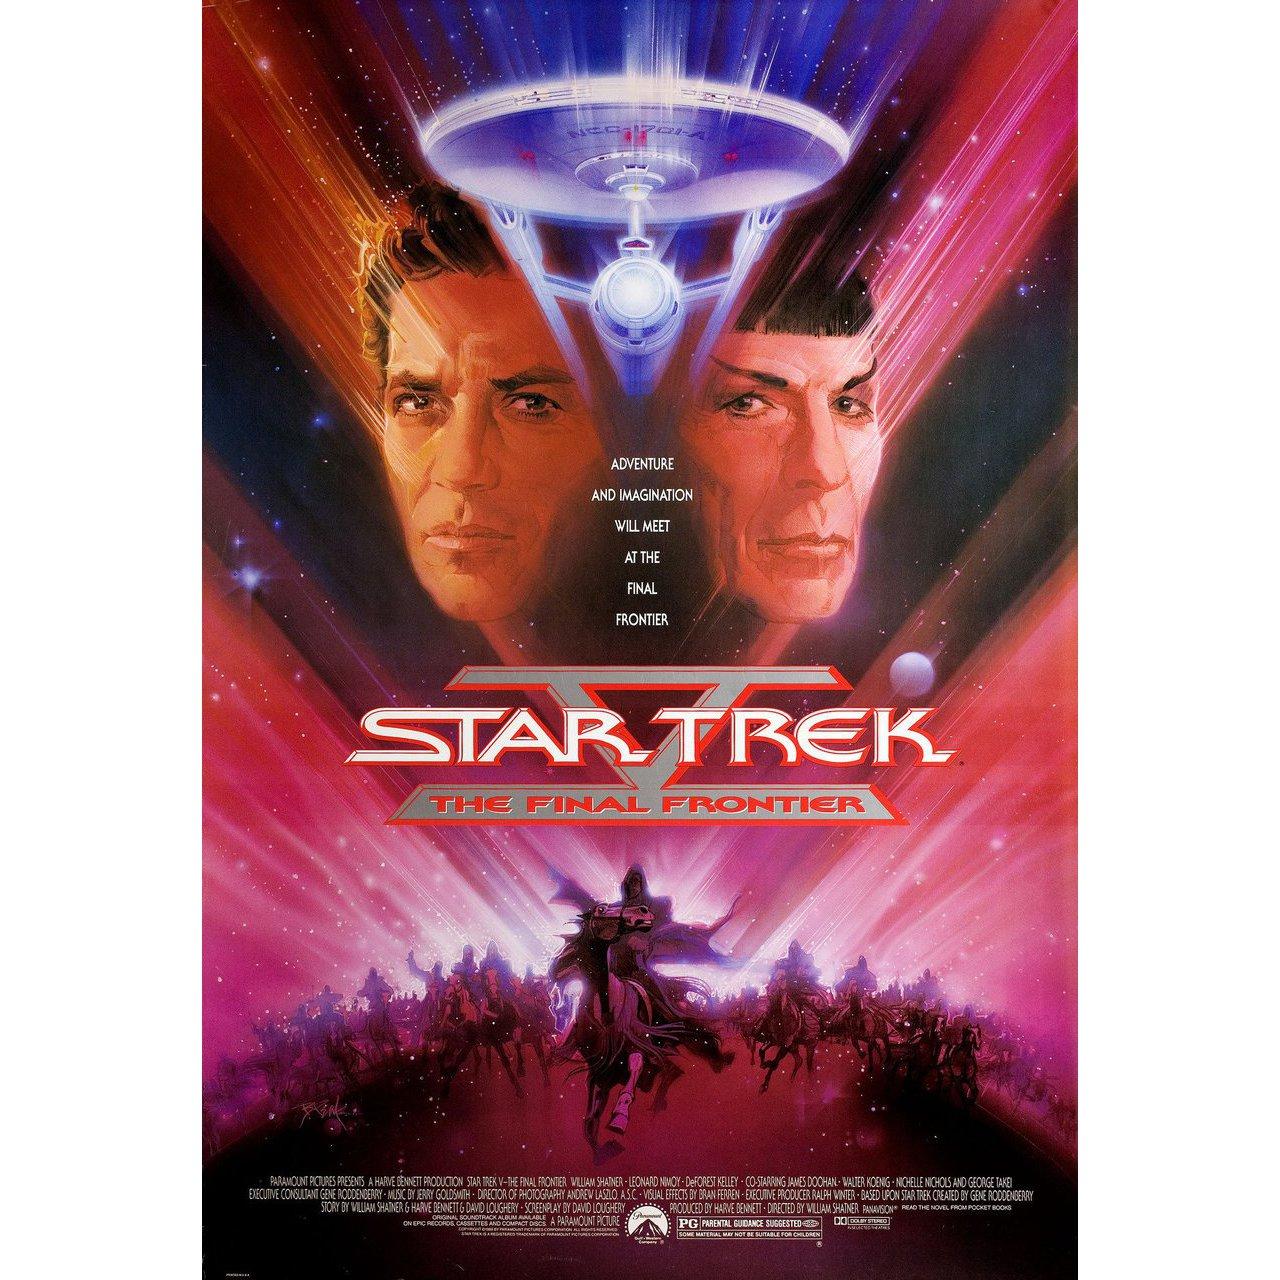 Original 1989 U.S. one sheet poster by Bob Peak for the film Star Trek V: The Final Frontier directed by William Shatner with William Shatner / Leonard Nimoy / DeForest Kelley / James Doohan. Very good-fine condition, rolled. Please note: the size